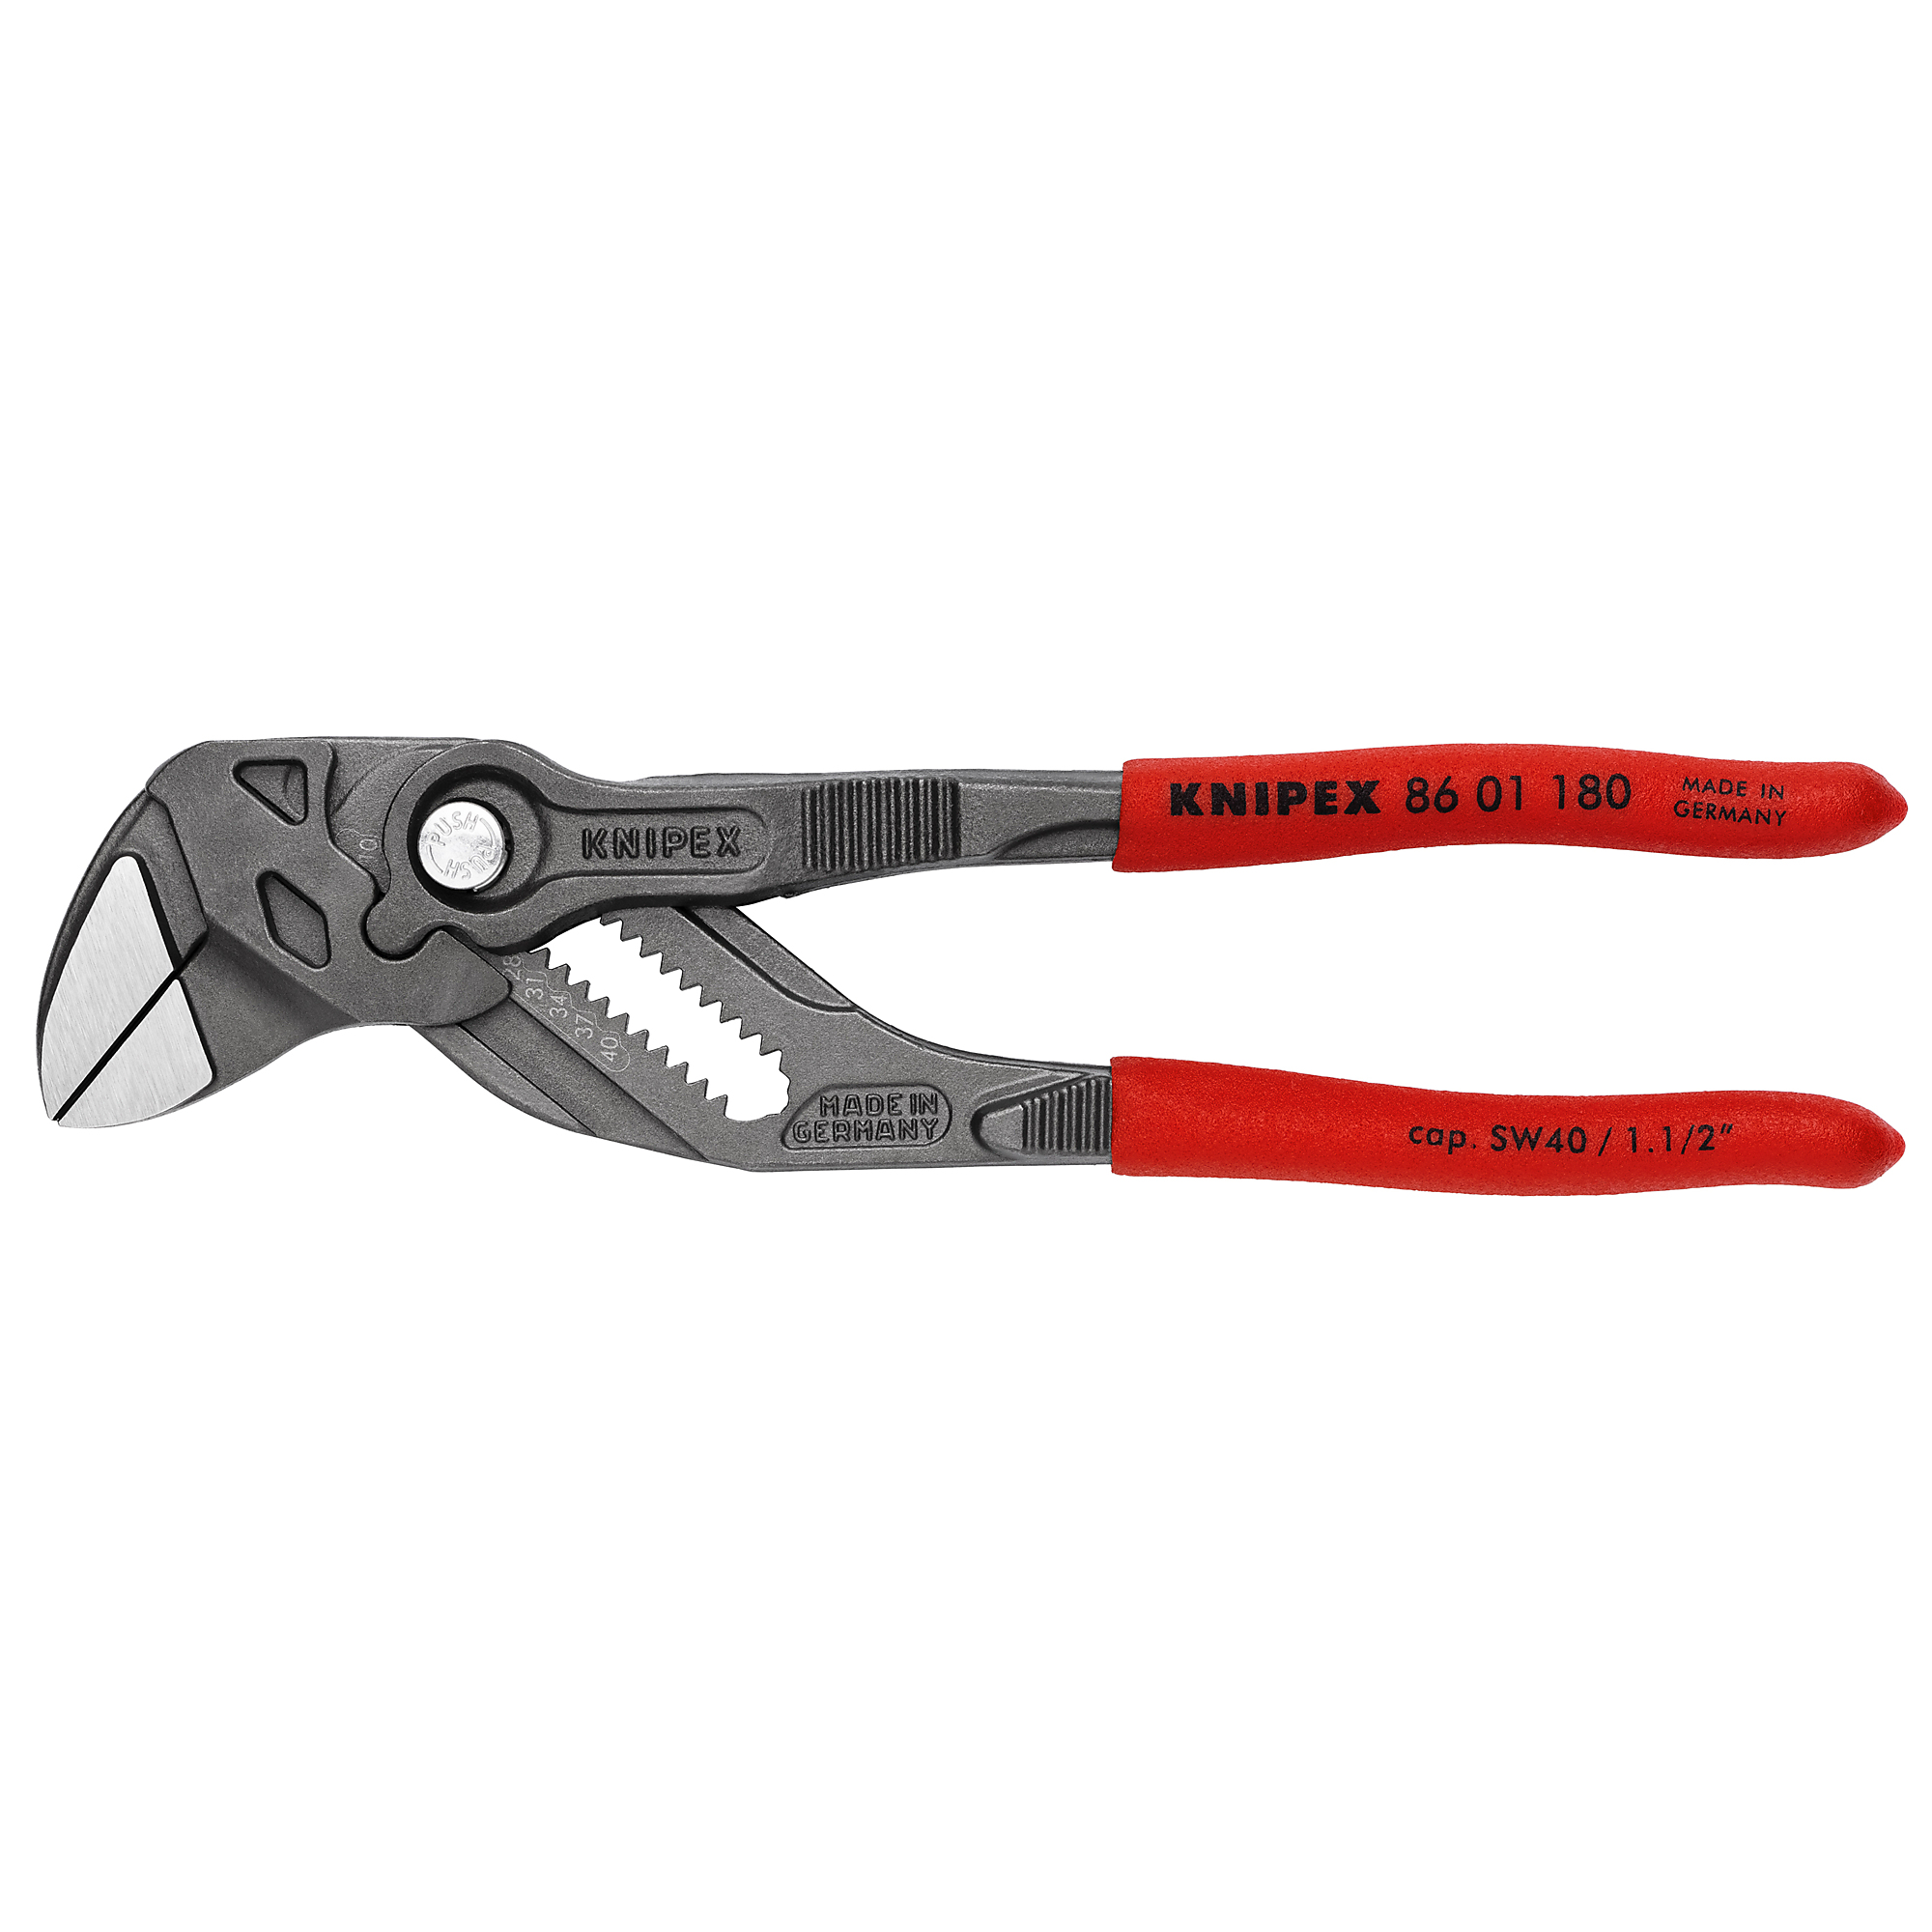 KNIPEX, Pliers Wrench, Non-slip plastic, Bulk, 7.25Inch, Pieces (qty.) 1 Material Steel, Jaw Capacity 1.5 in, Model 86 01 180